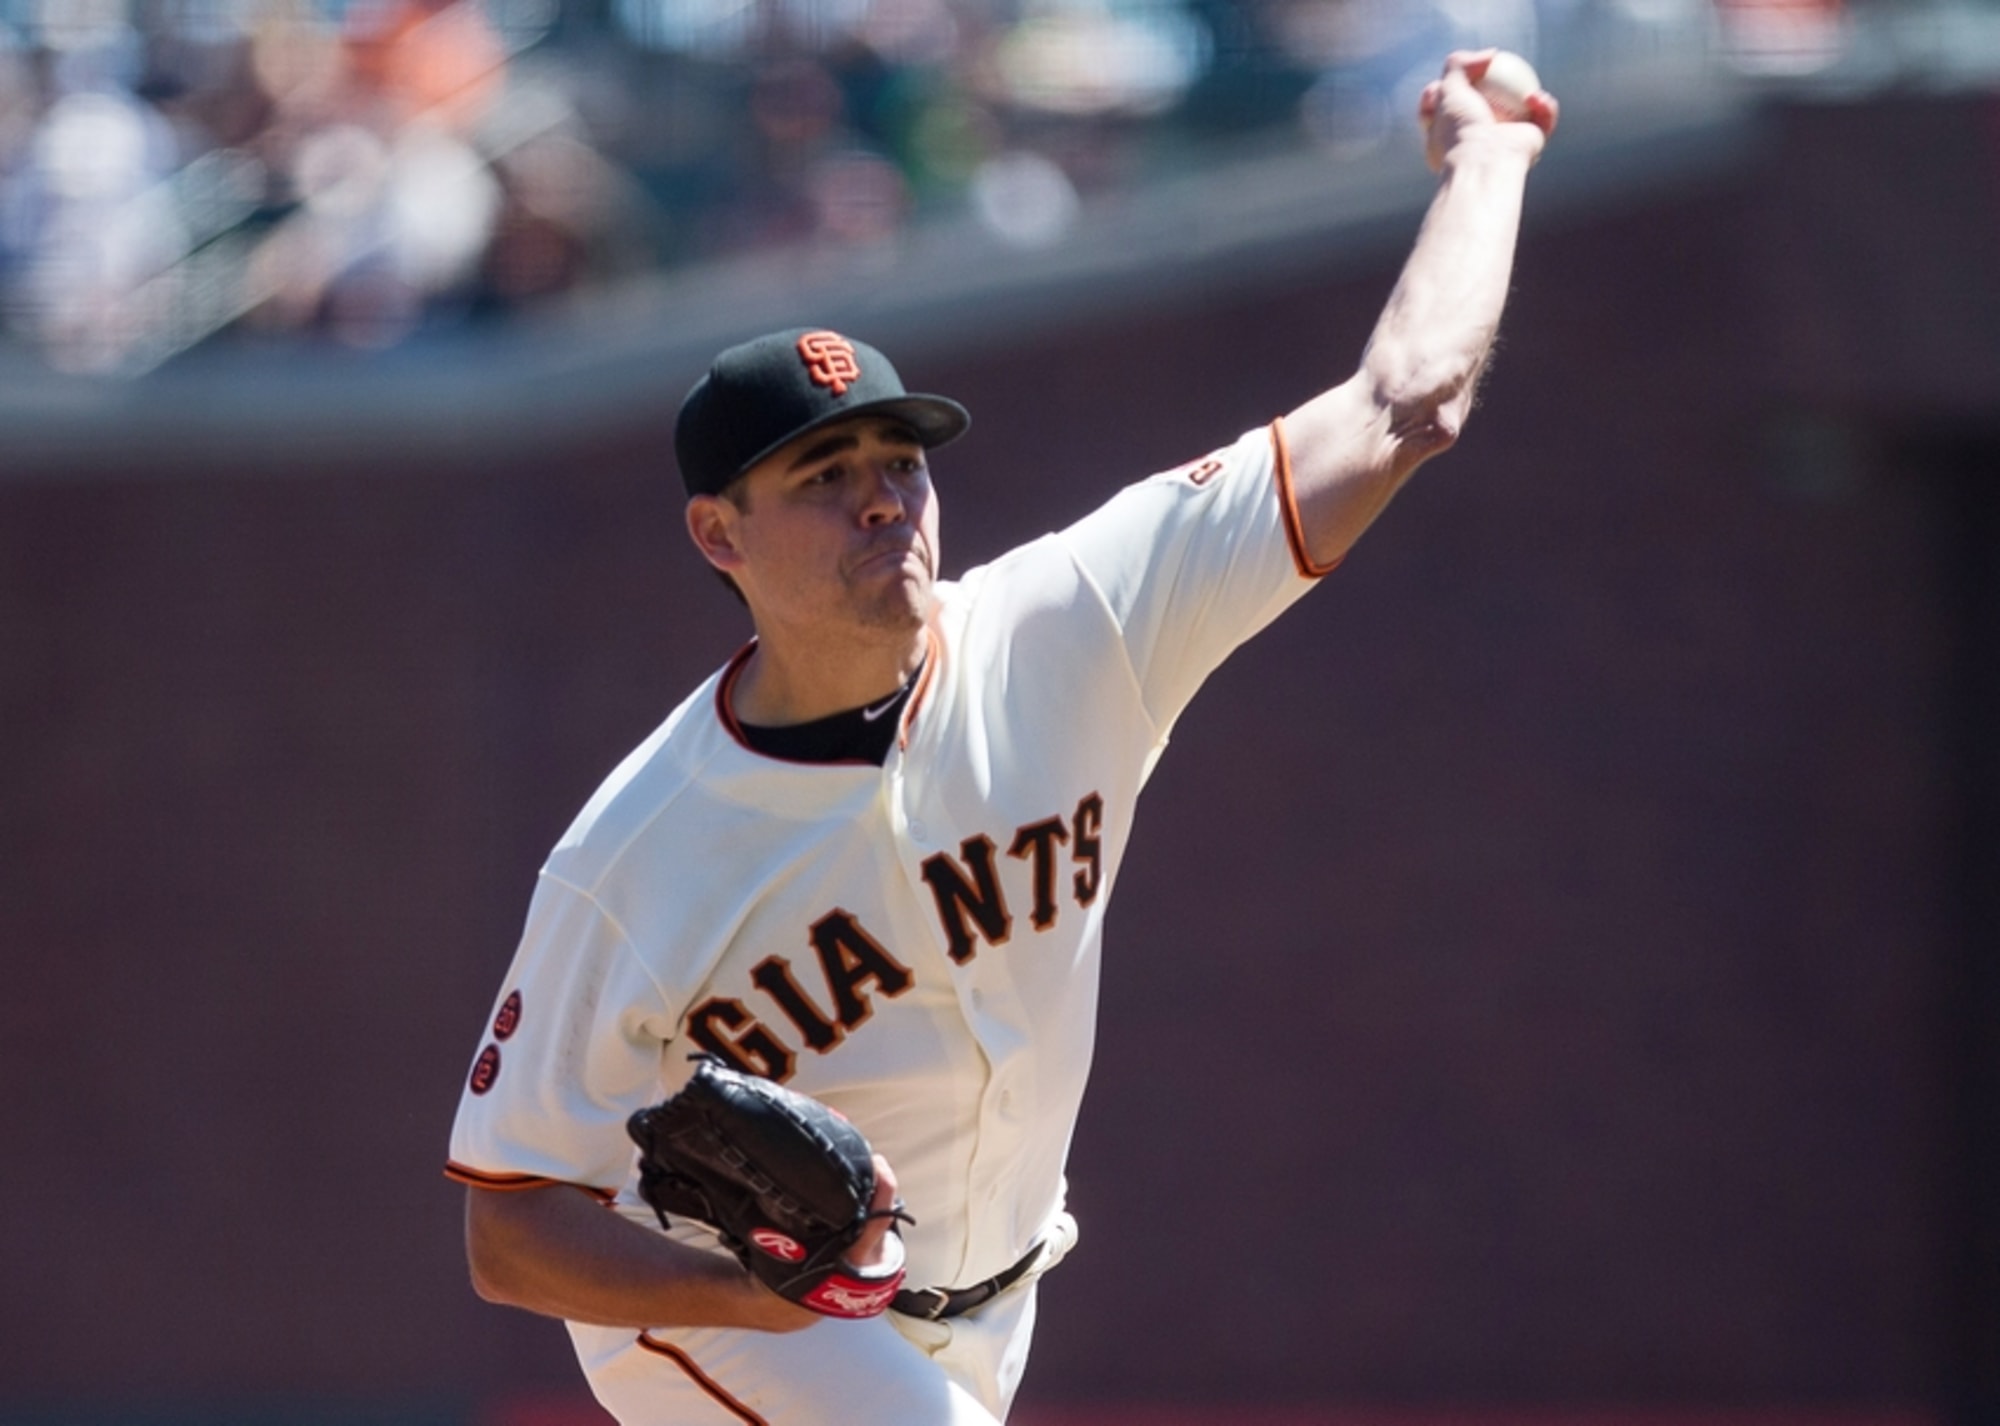 Giants getting more roster options with two September callups